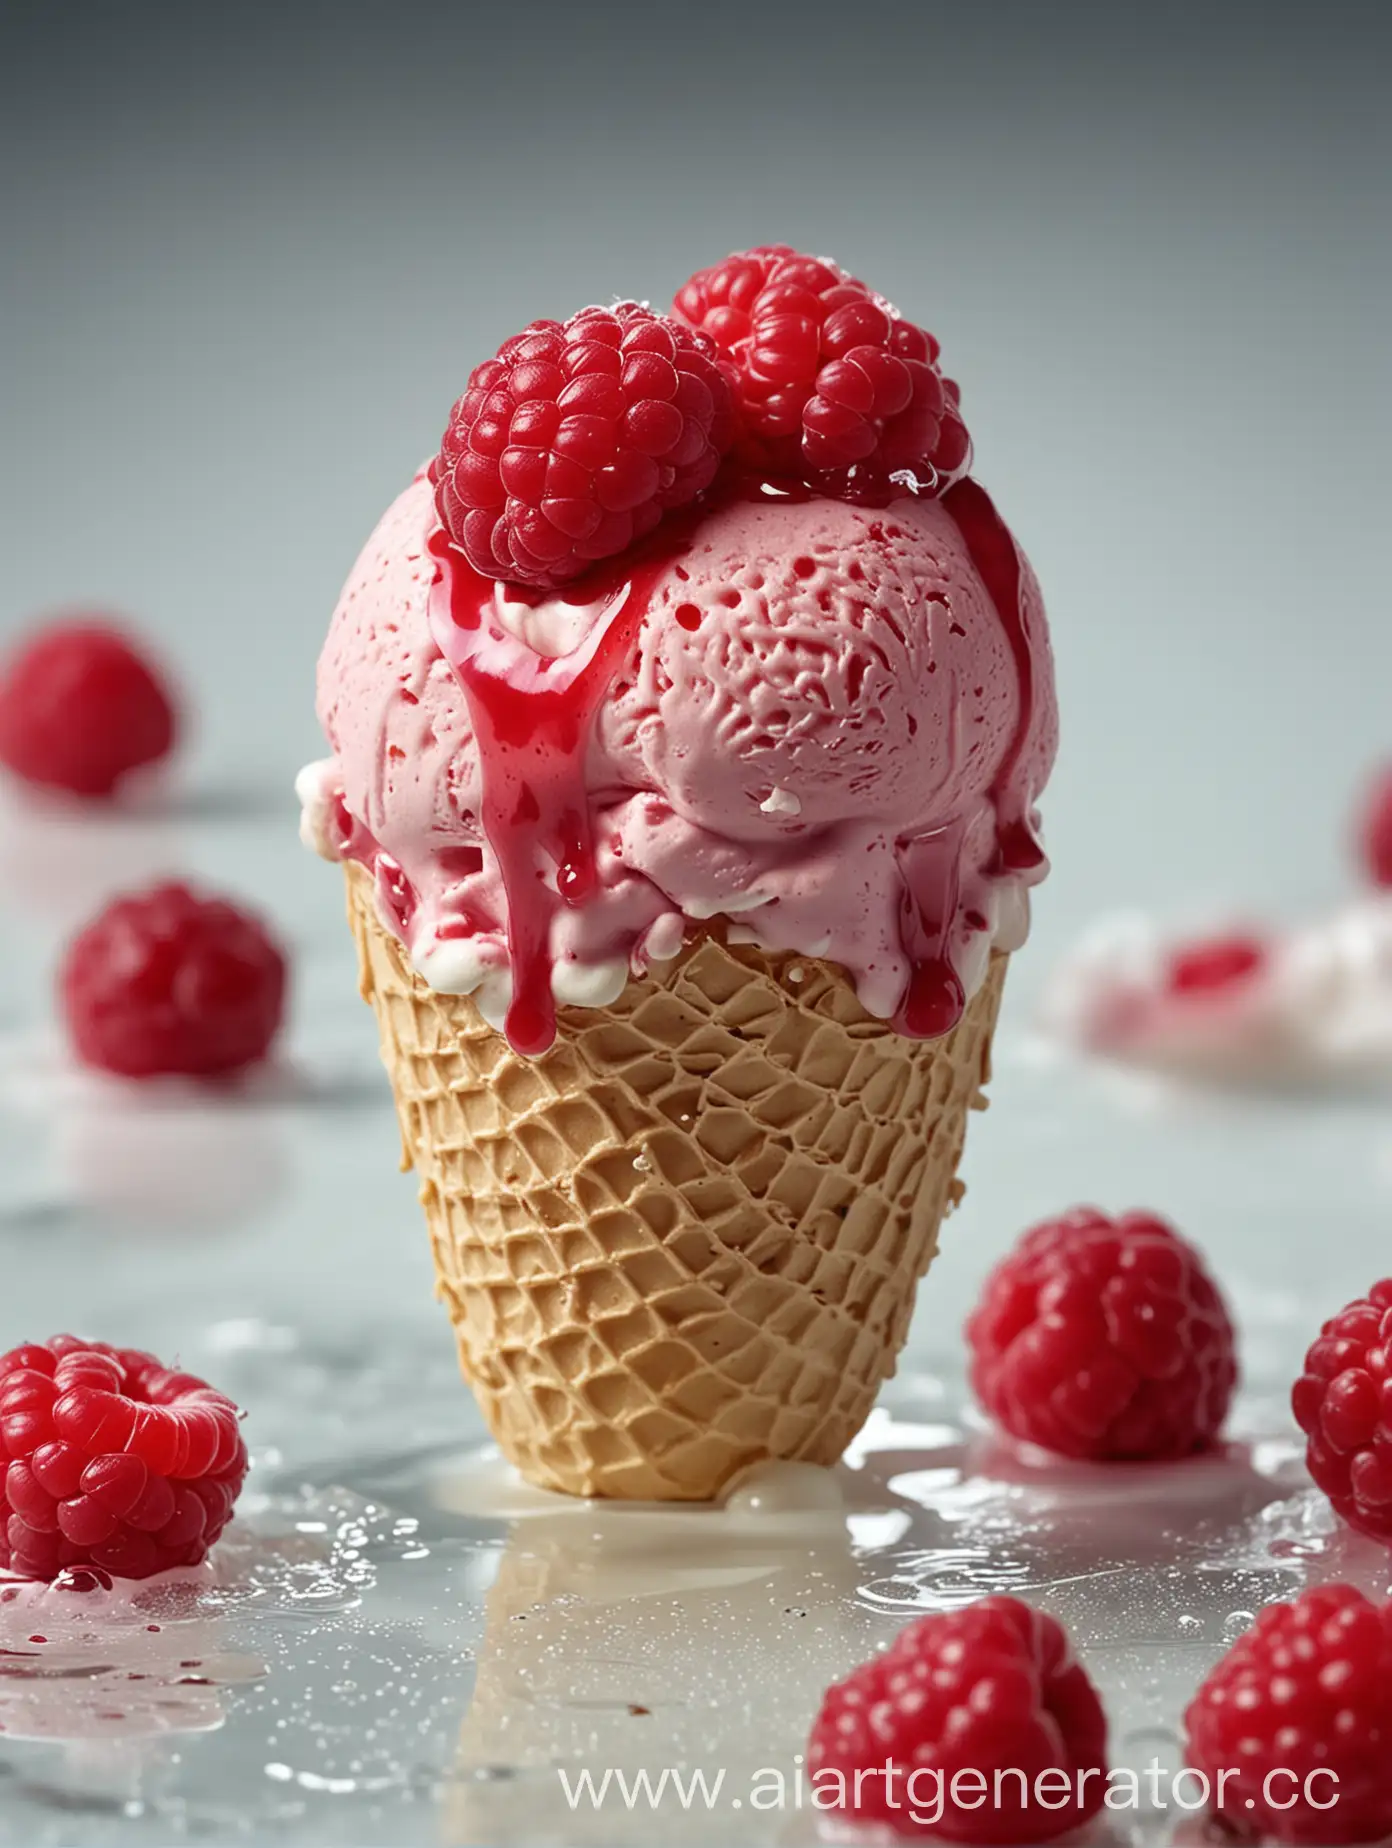 Vibrant-4K-Image-of-a-Long-Appetizing-Raspberry-Melting-in-Bright-Colors